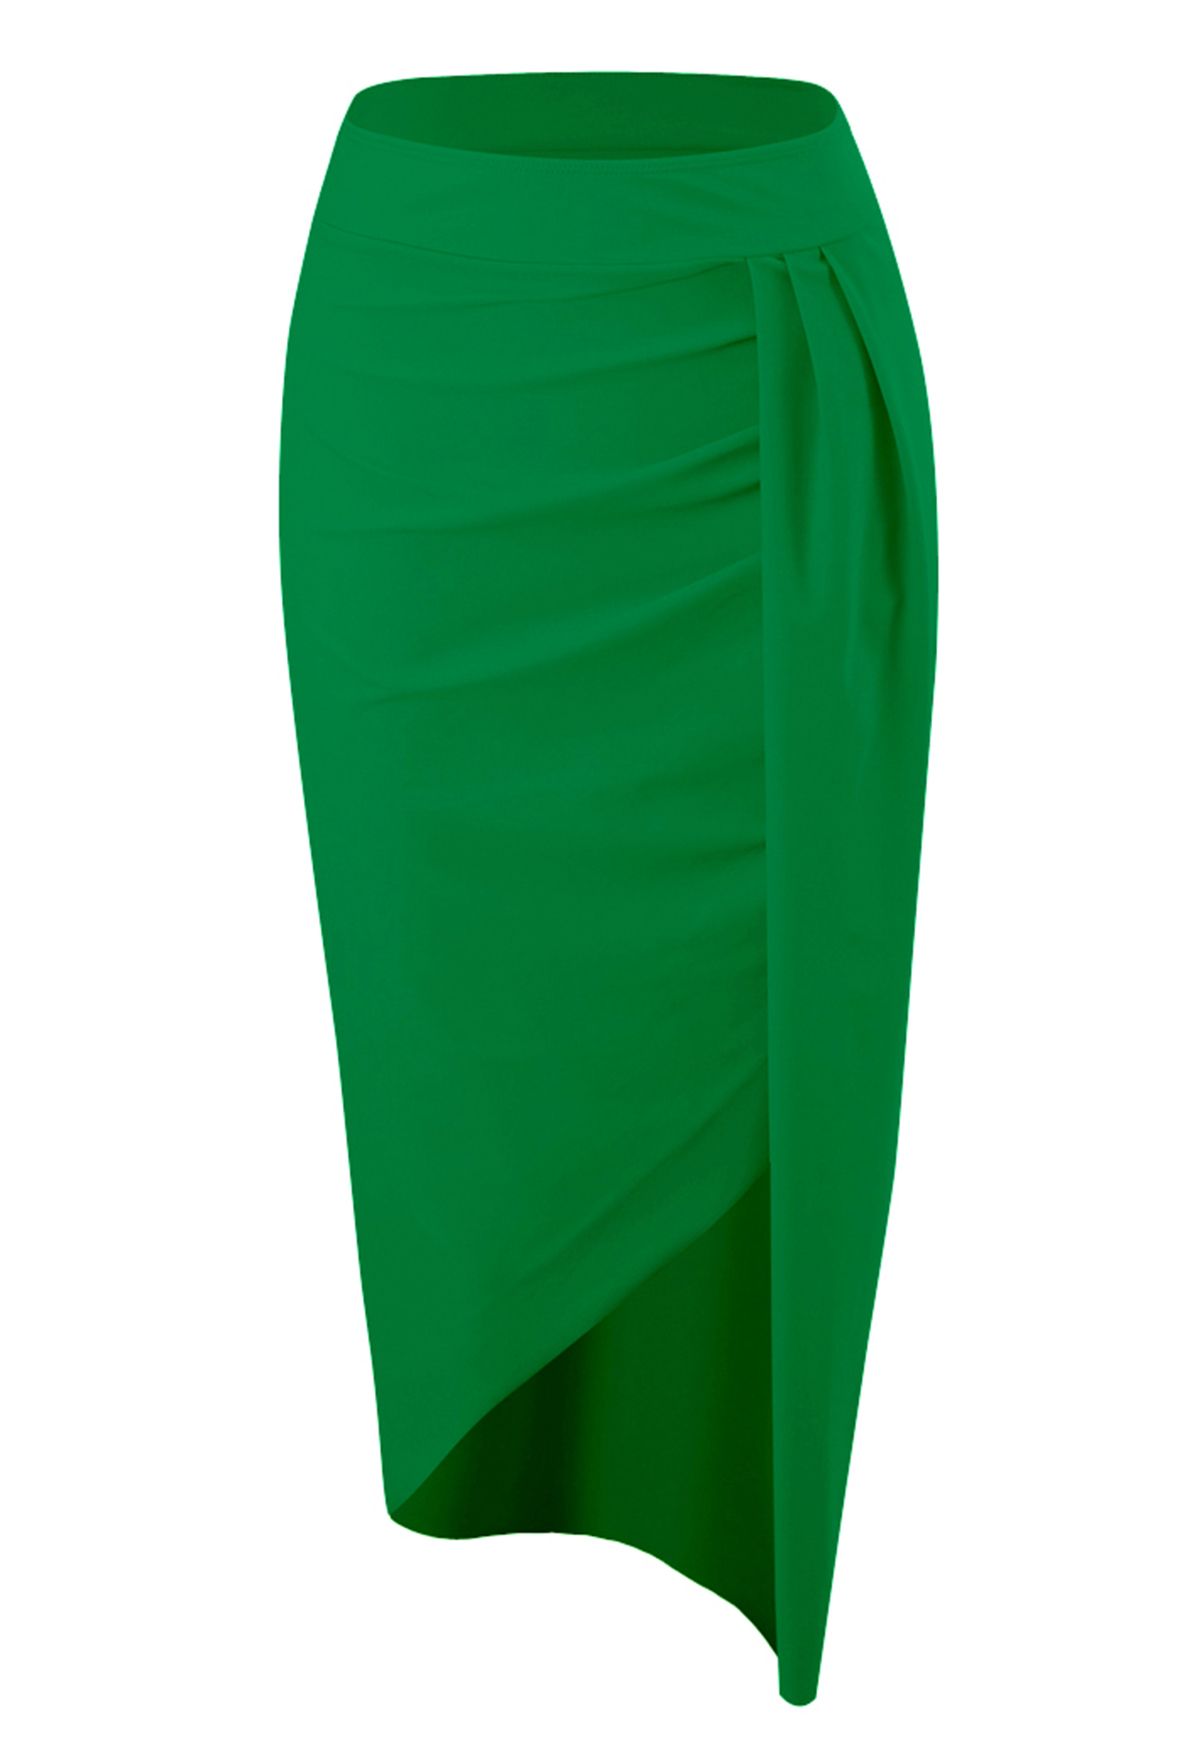 Ruched Asymmetric Wrap Cover-Up Skirt in Green